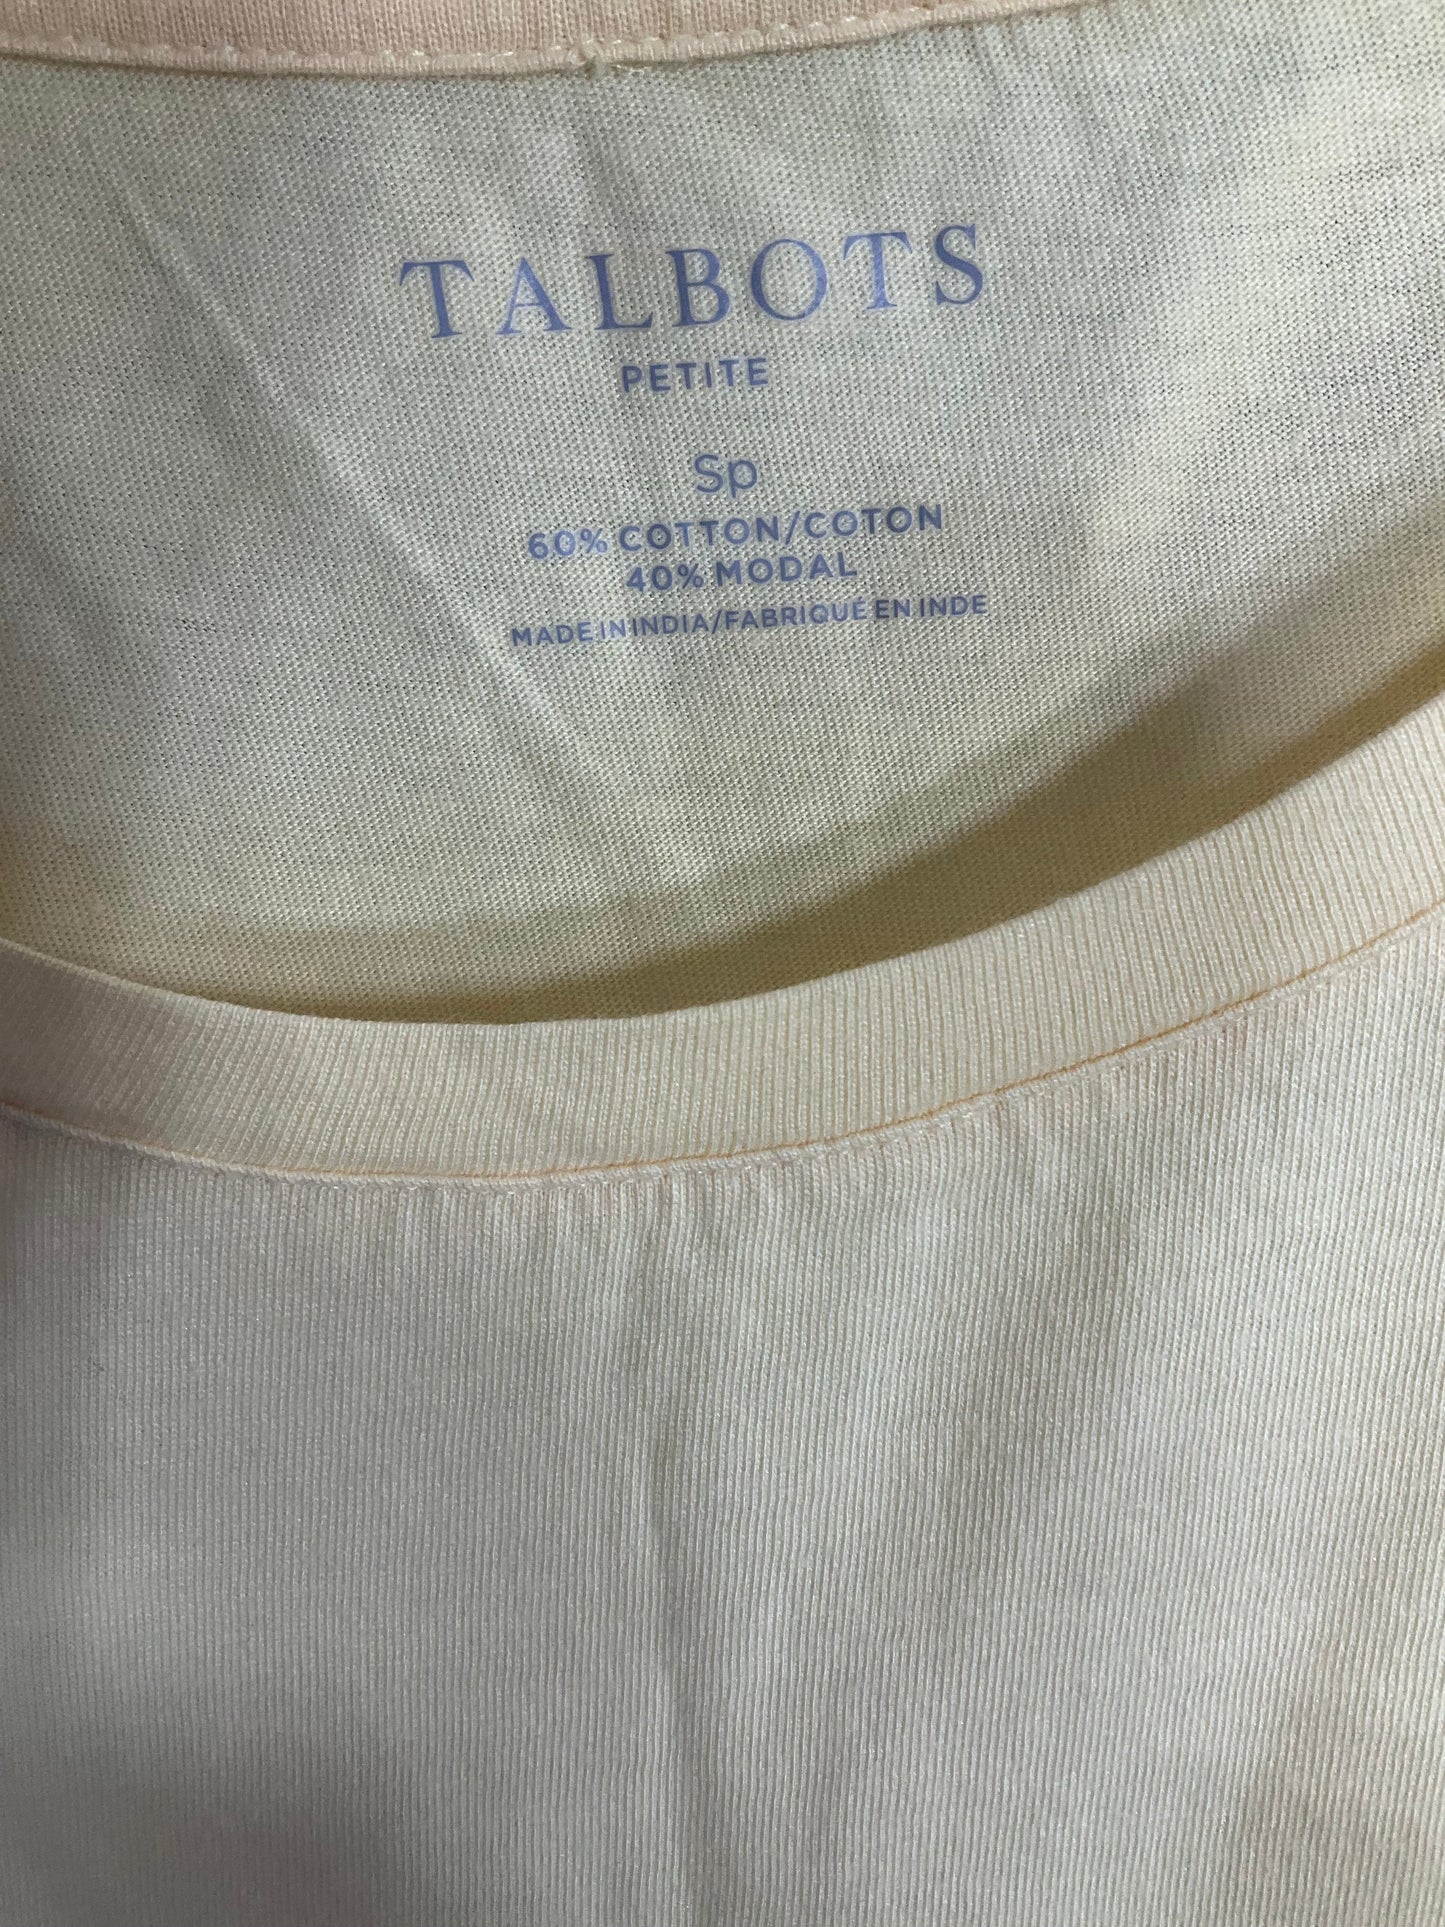 Yellow Top Short Sleeve Talbots, Size S